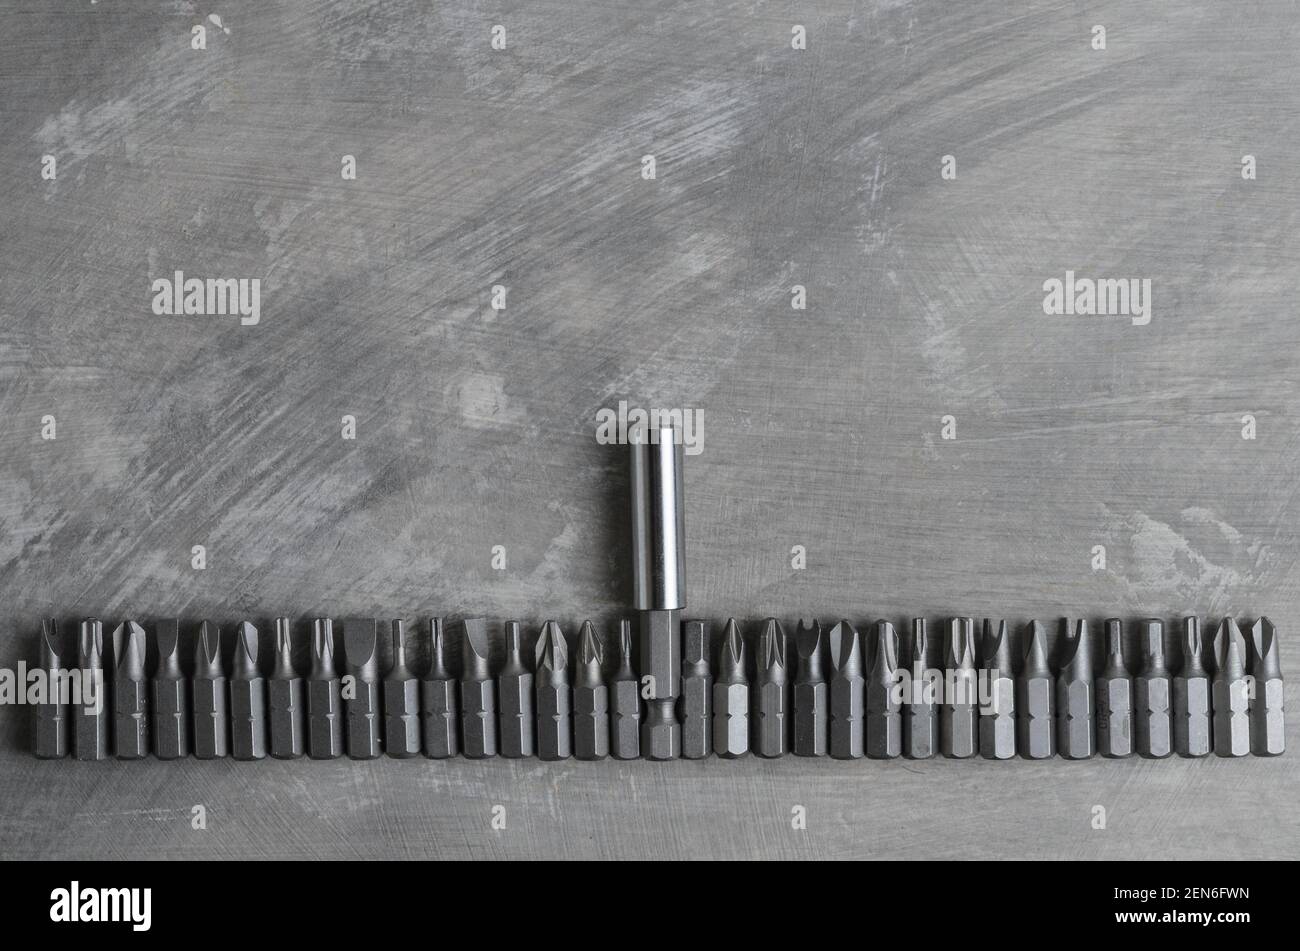 Screwdriver bits for various slots laid out in a row on a gray concrete surface. Stock Photo